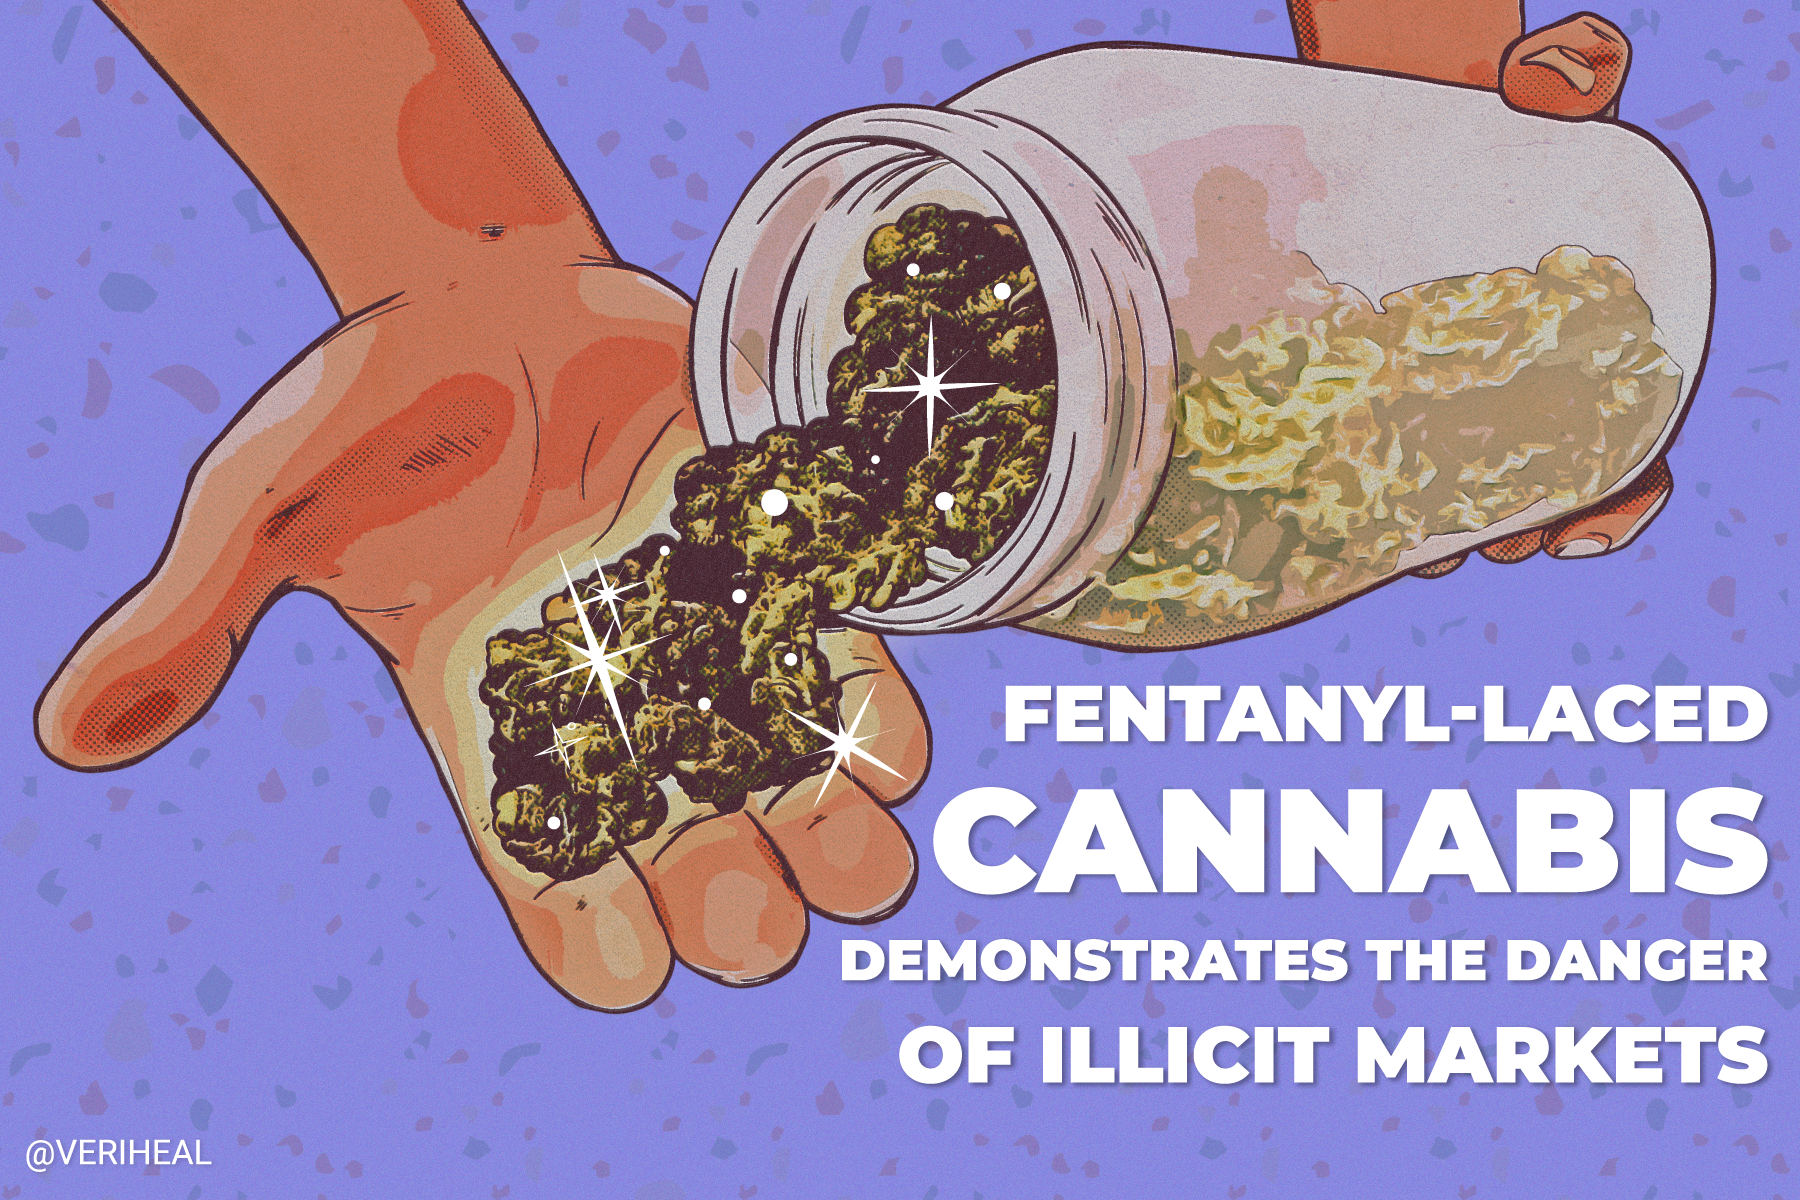 Fentanyl-Laced Cannabis Demonstrates the Danger of Illicit Markets